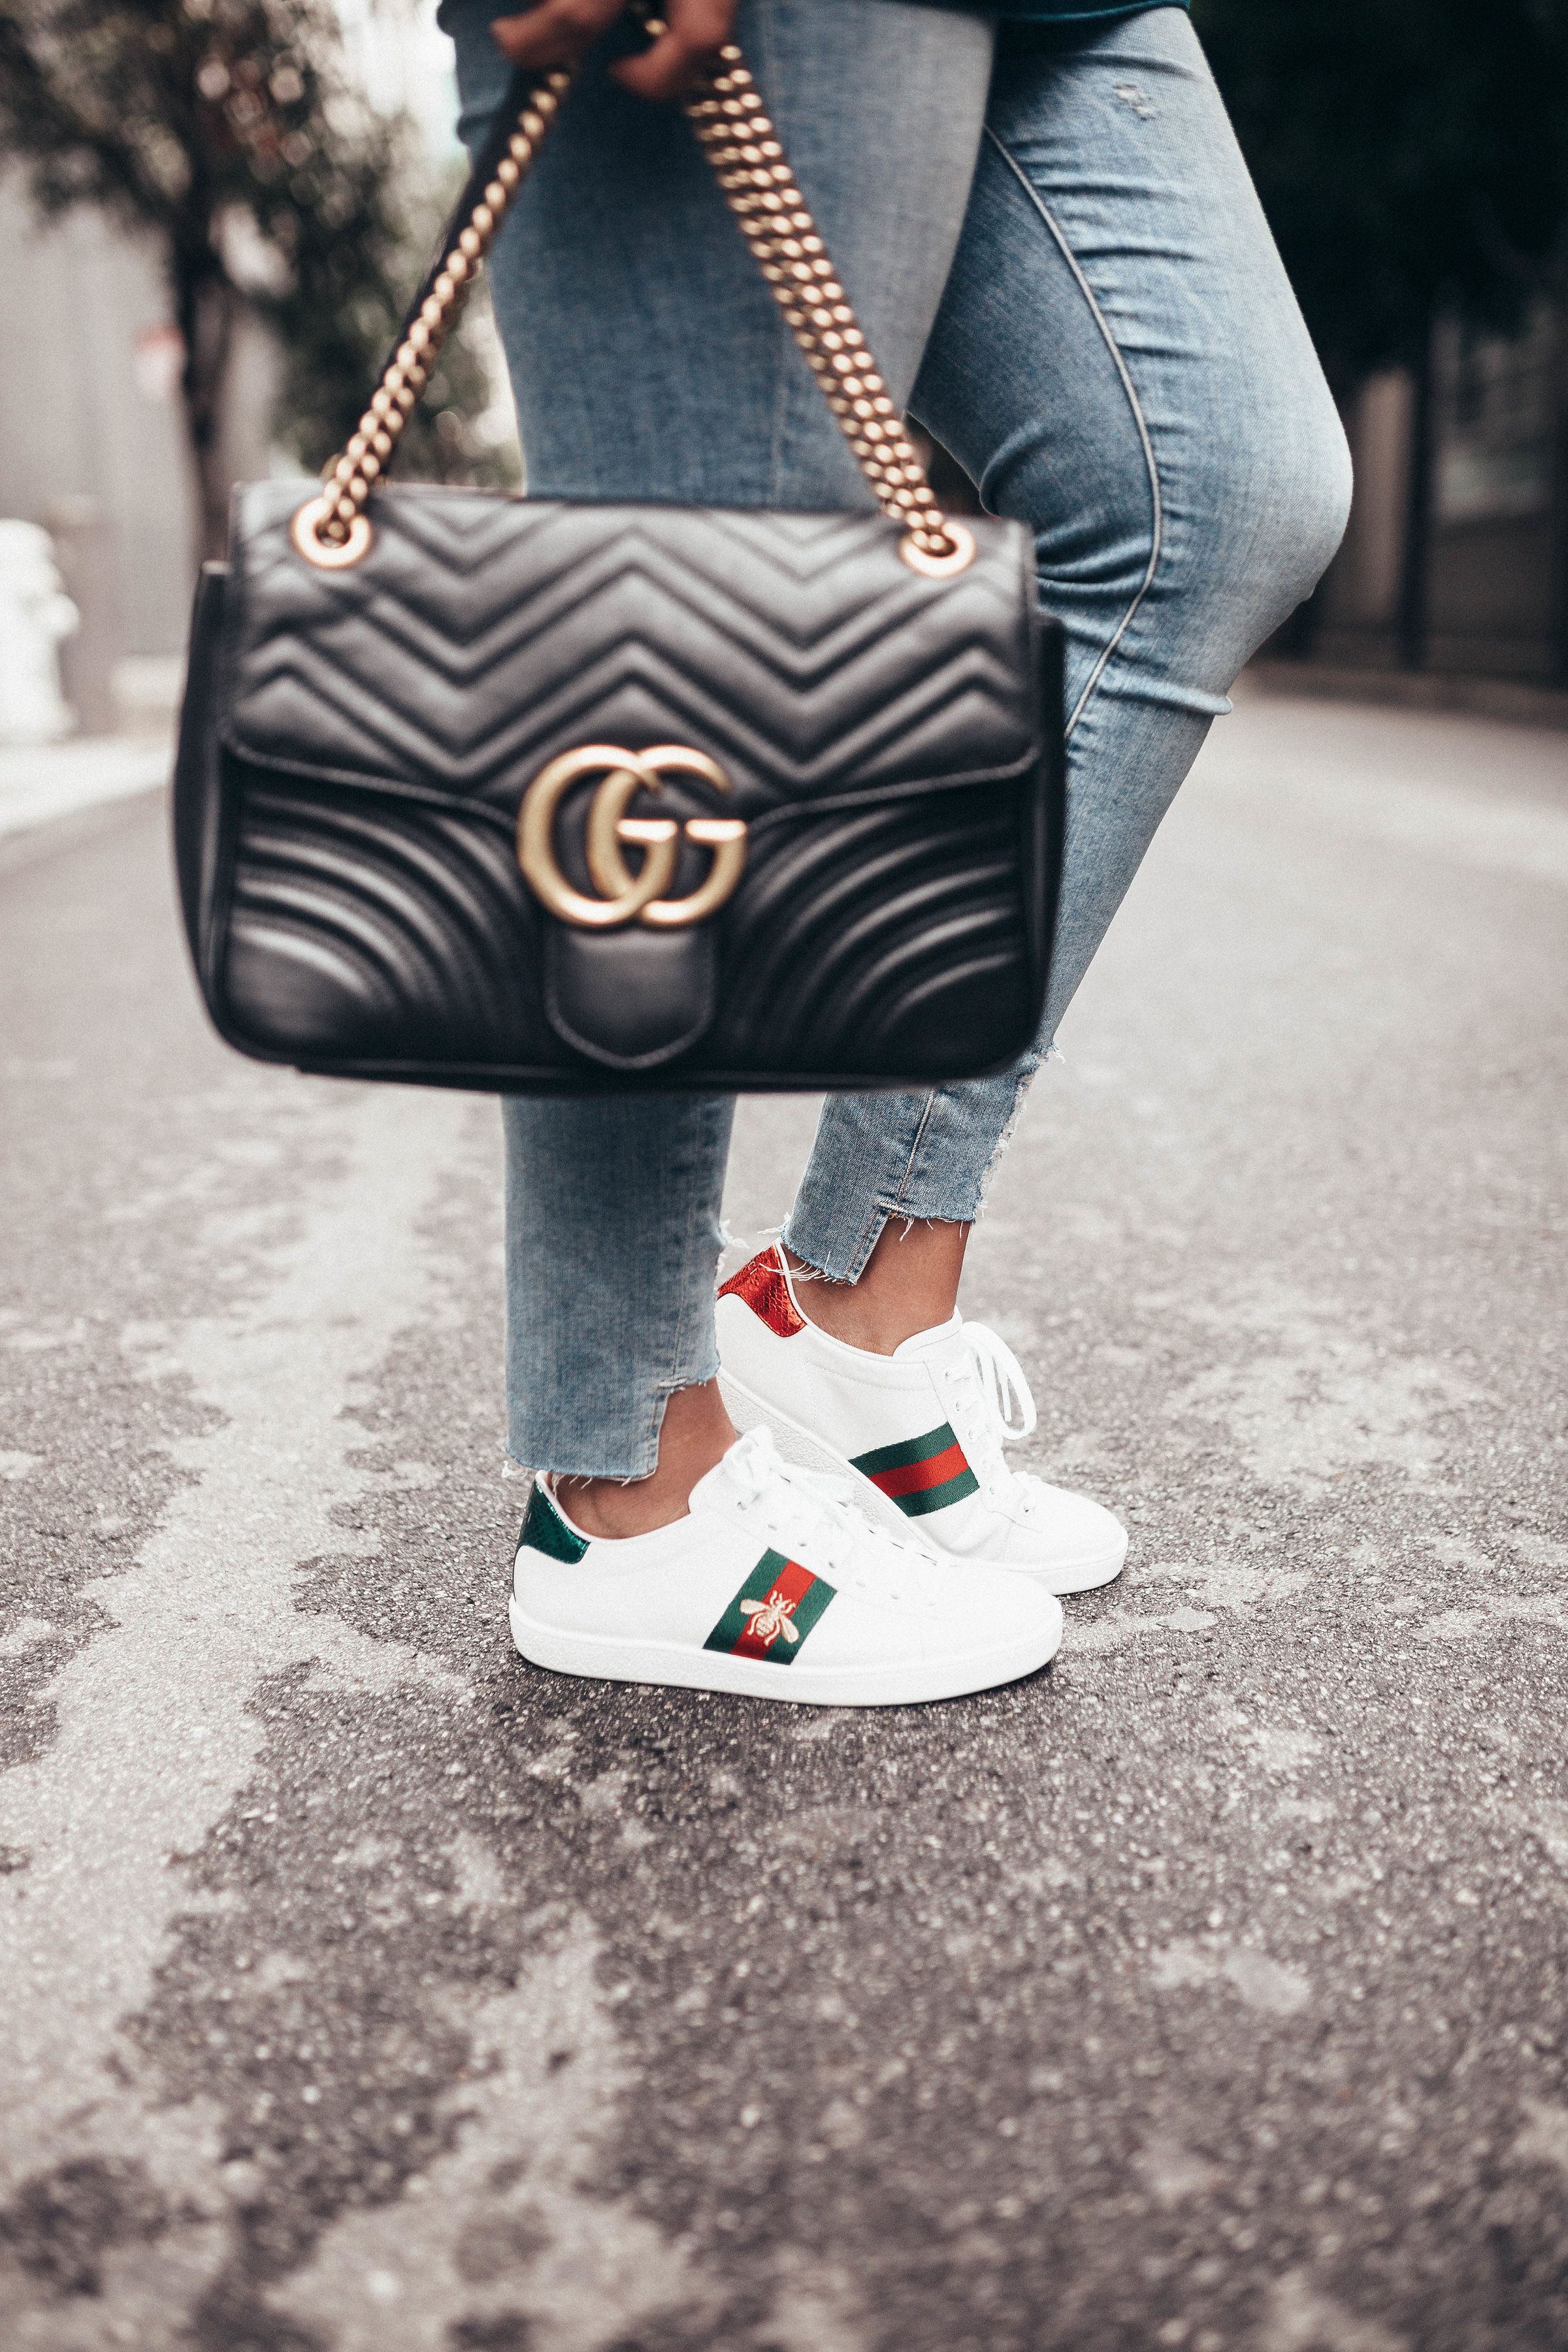 Ashley Zeal from Two Peas in a Prada shares how to clean Gucci sneakers. She is using the Jason Markk shoe kit that's only $30!